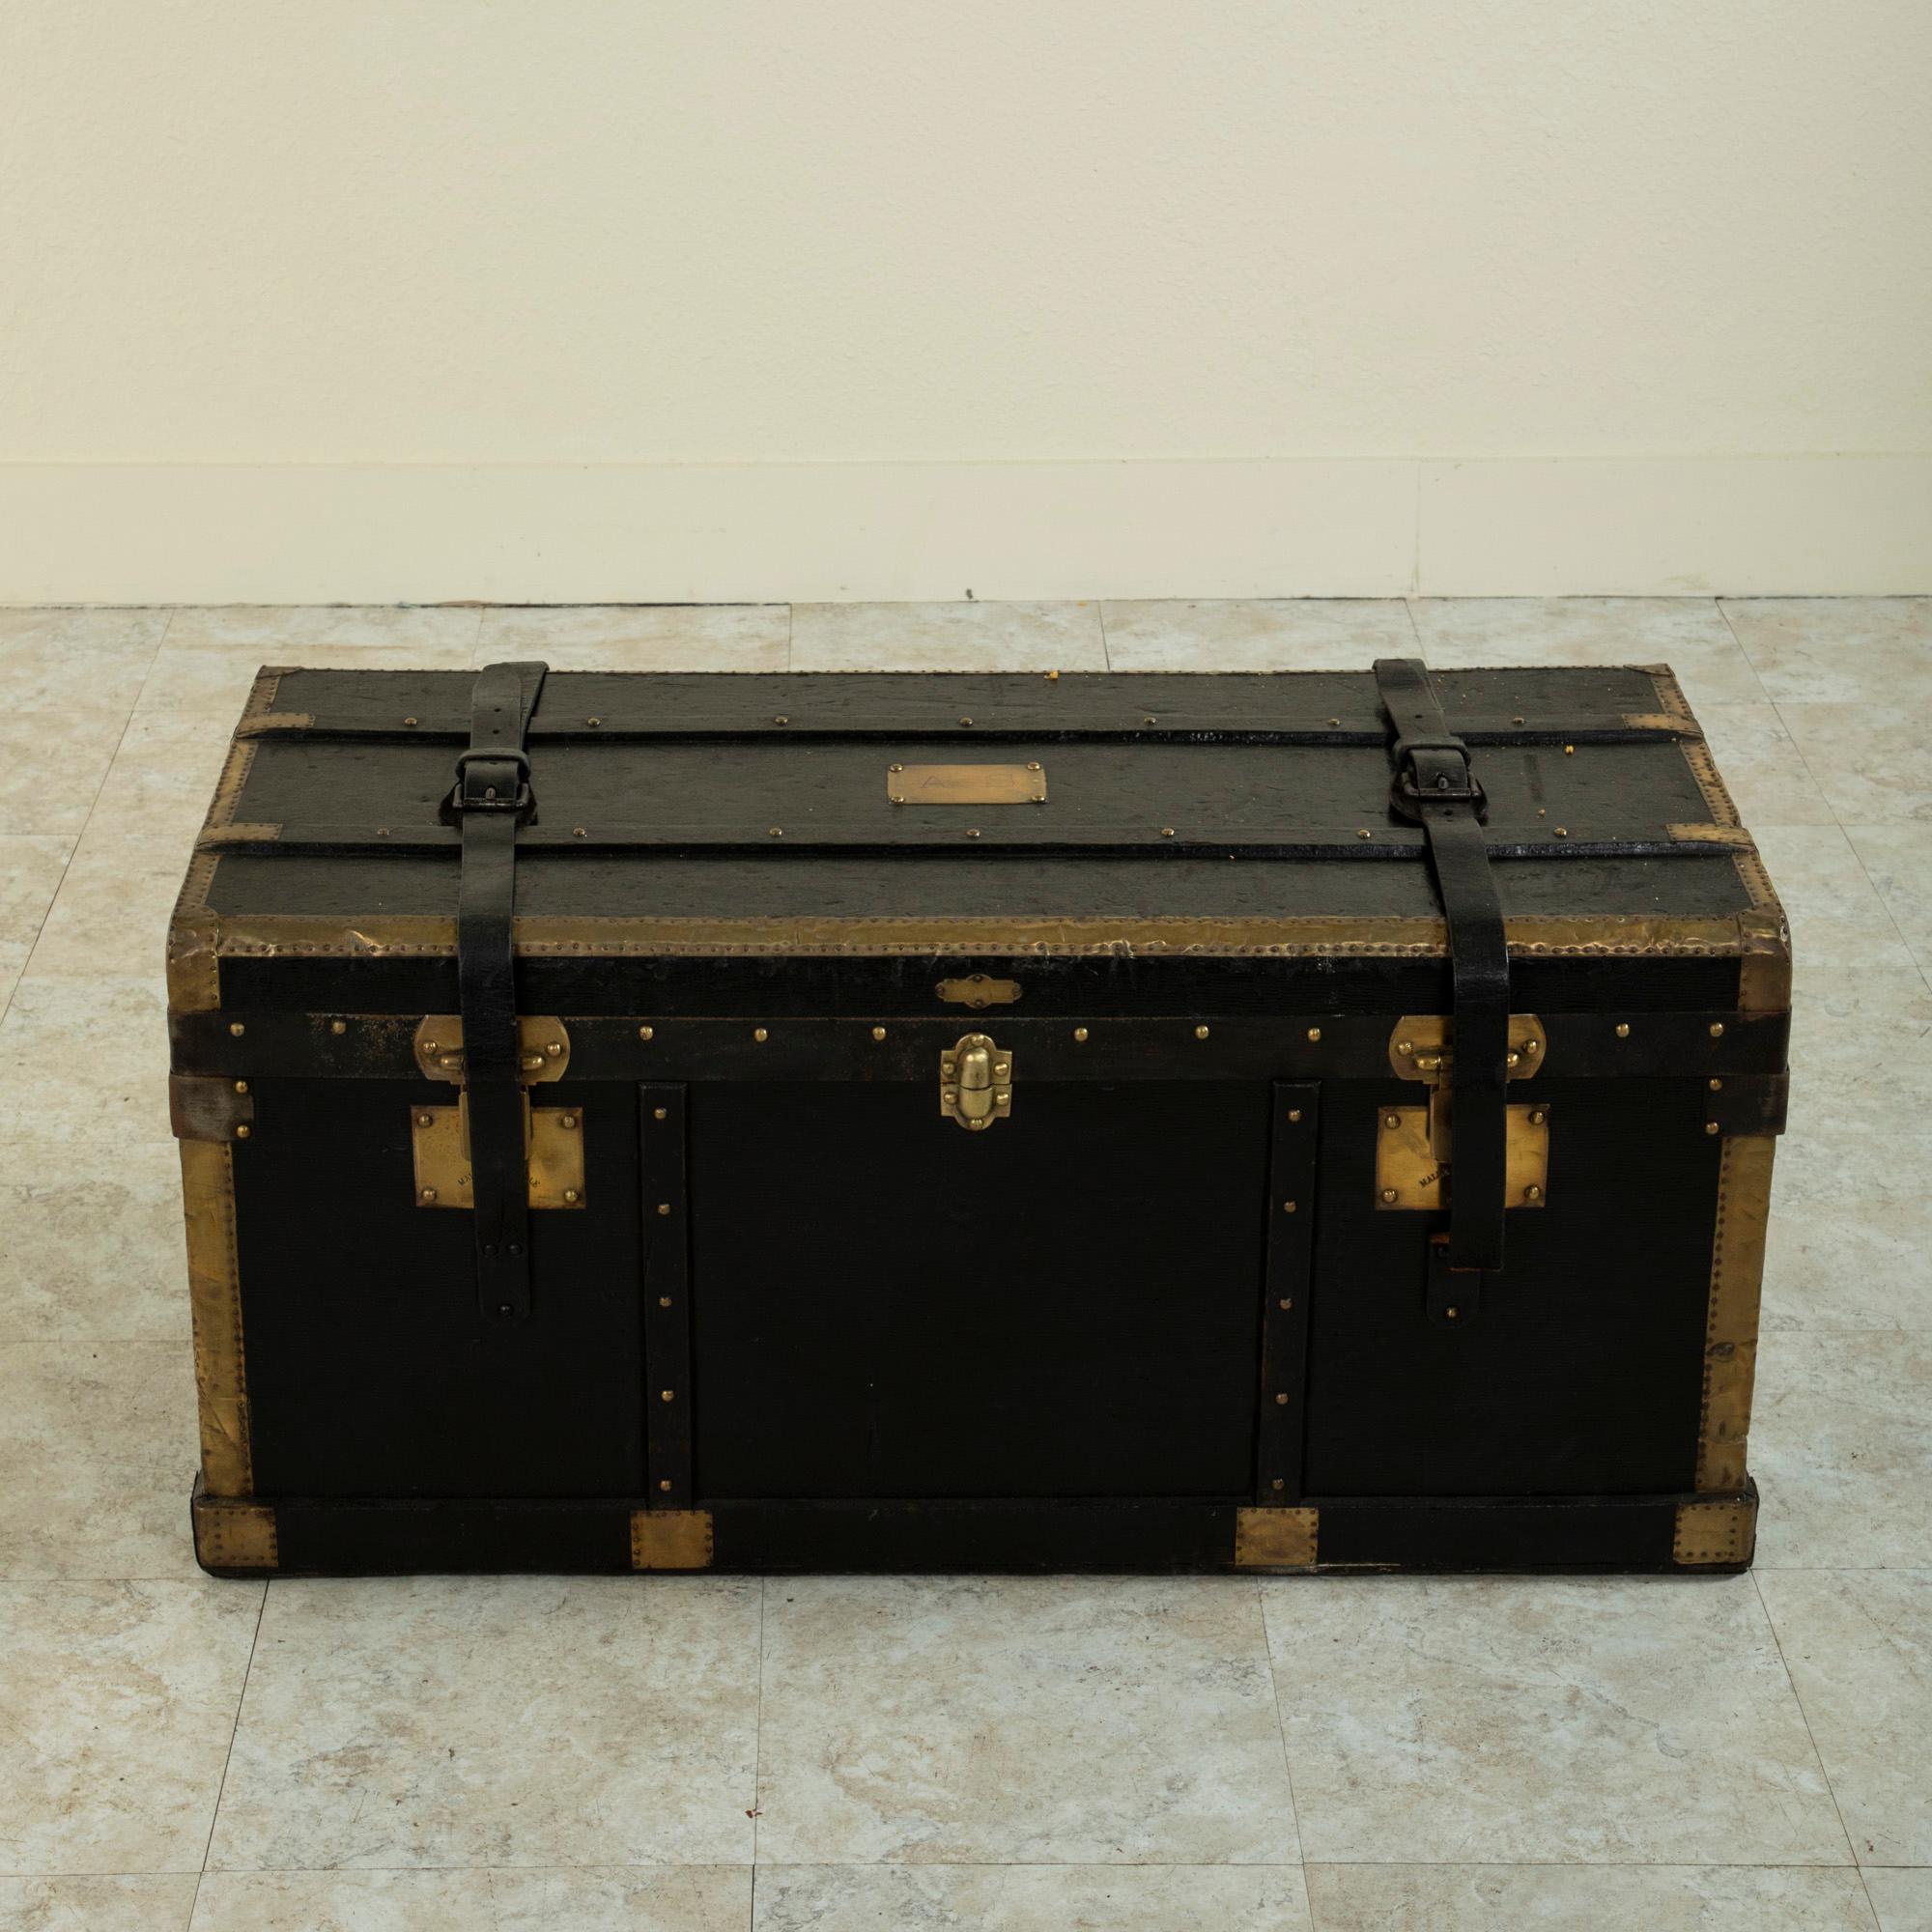 This French wooden steam trunk from the turn of the 20th century is covered in black leather and features wooden runners and brass corners that offered protection from damage when traveling. Its original leather handles and straps are still intact.